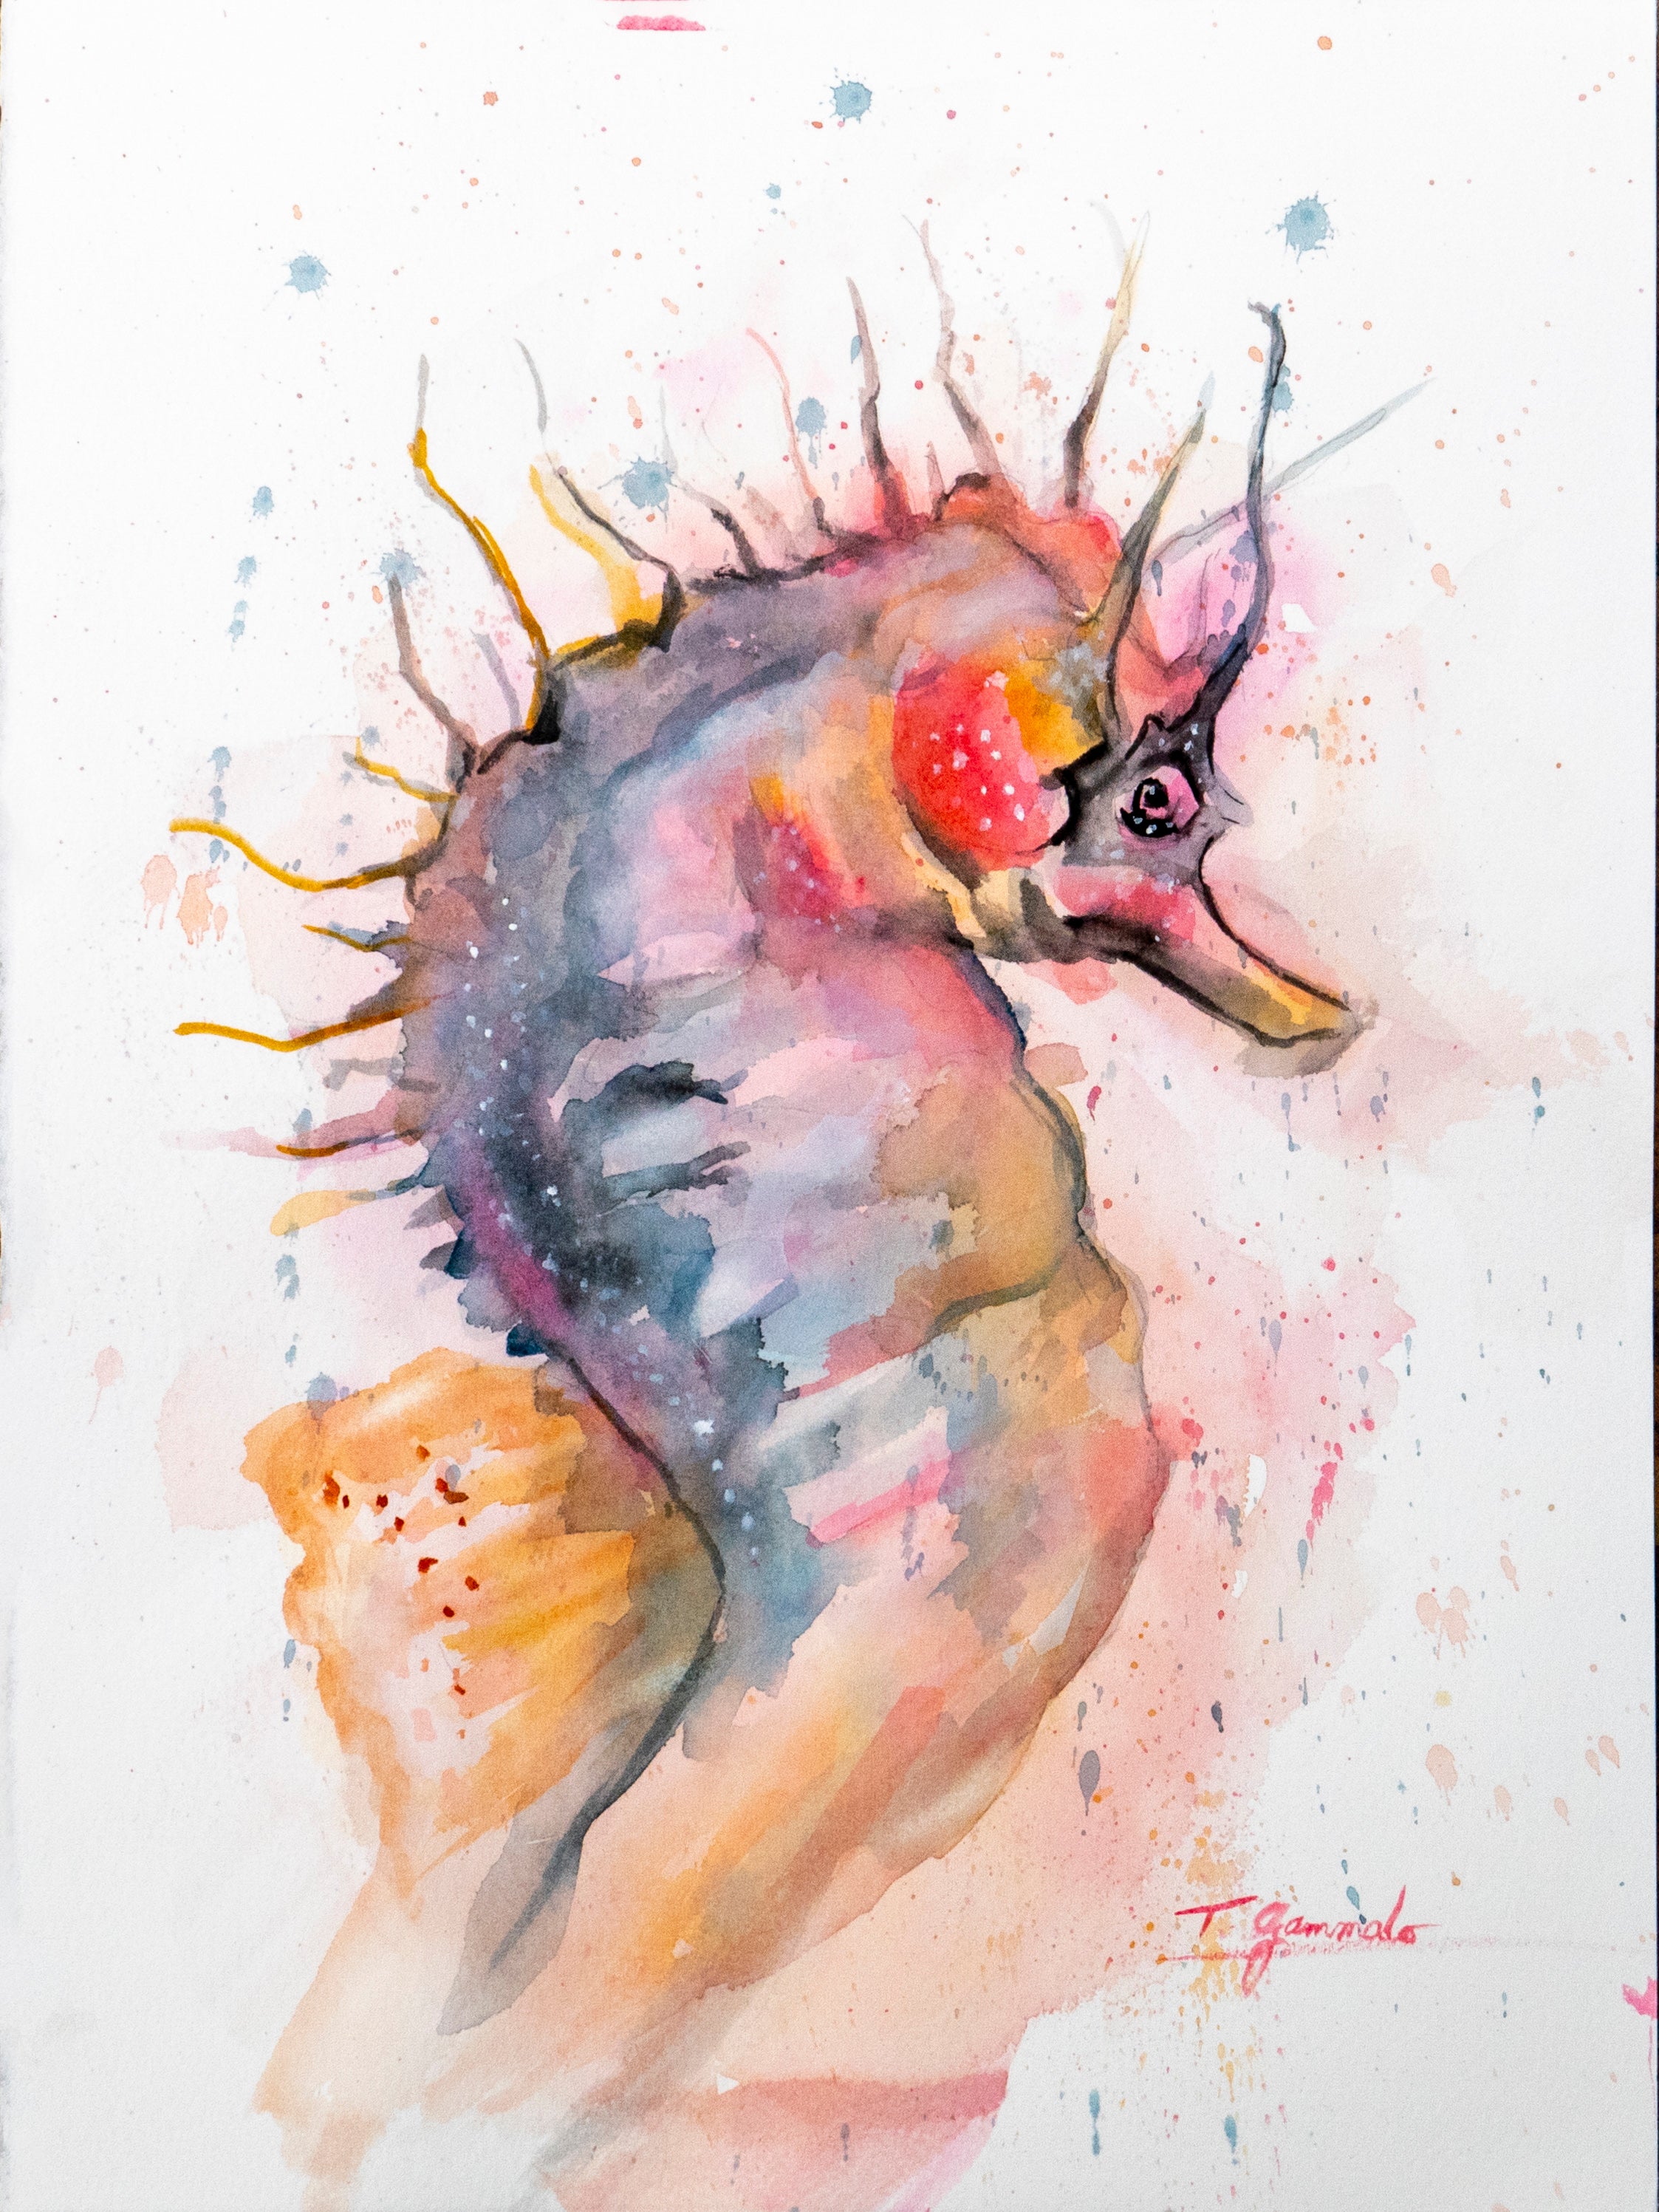 Watercolor painting of sea horse titled 'Horsing Around' by artist Teri Gammalo